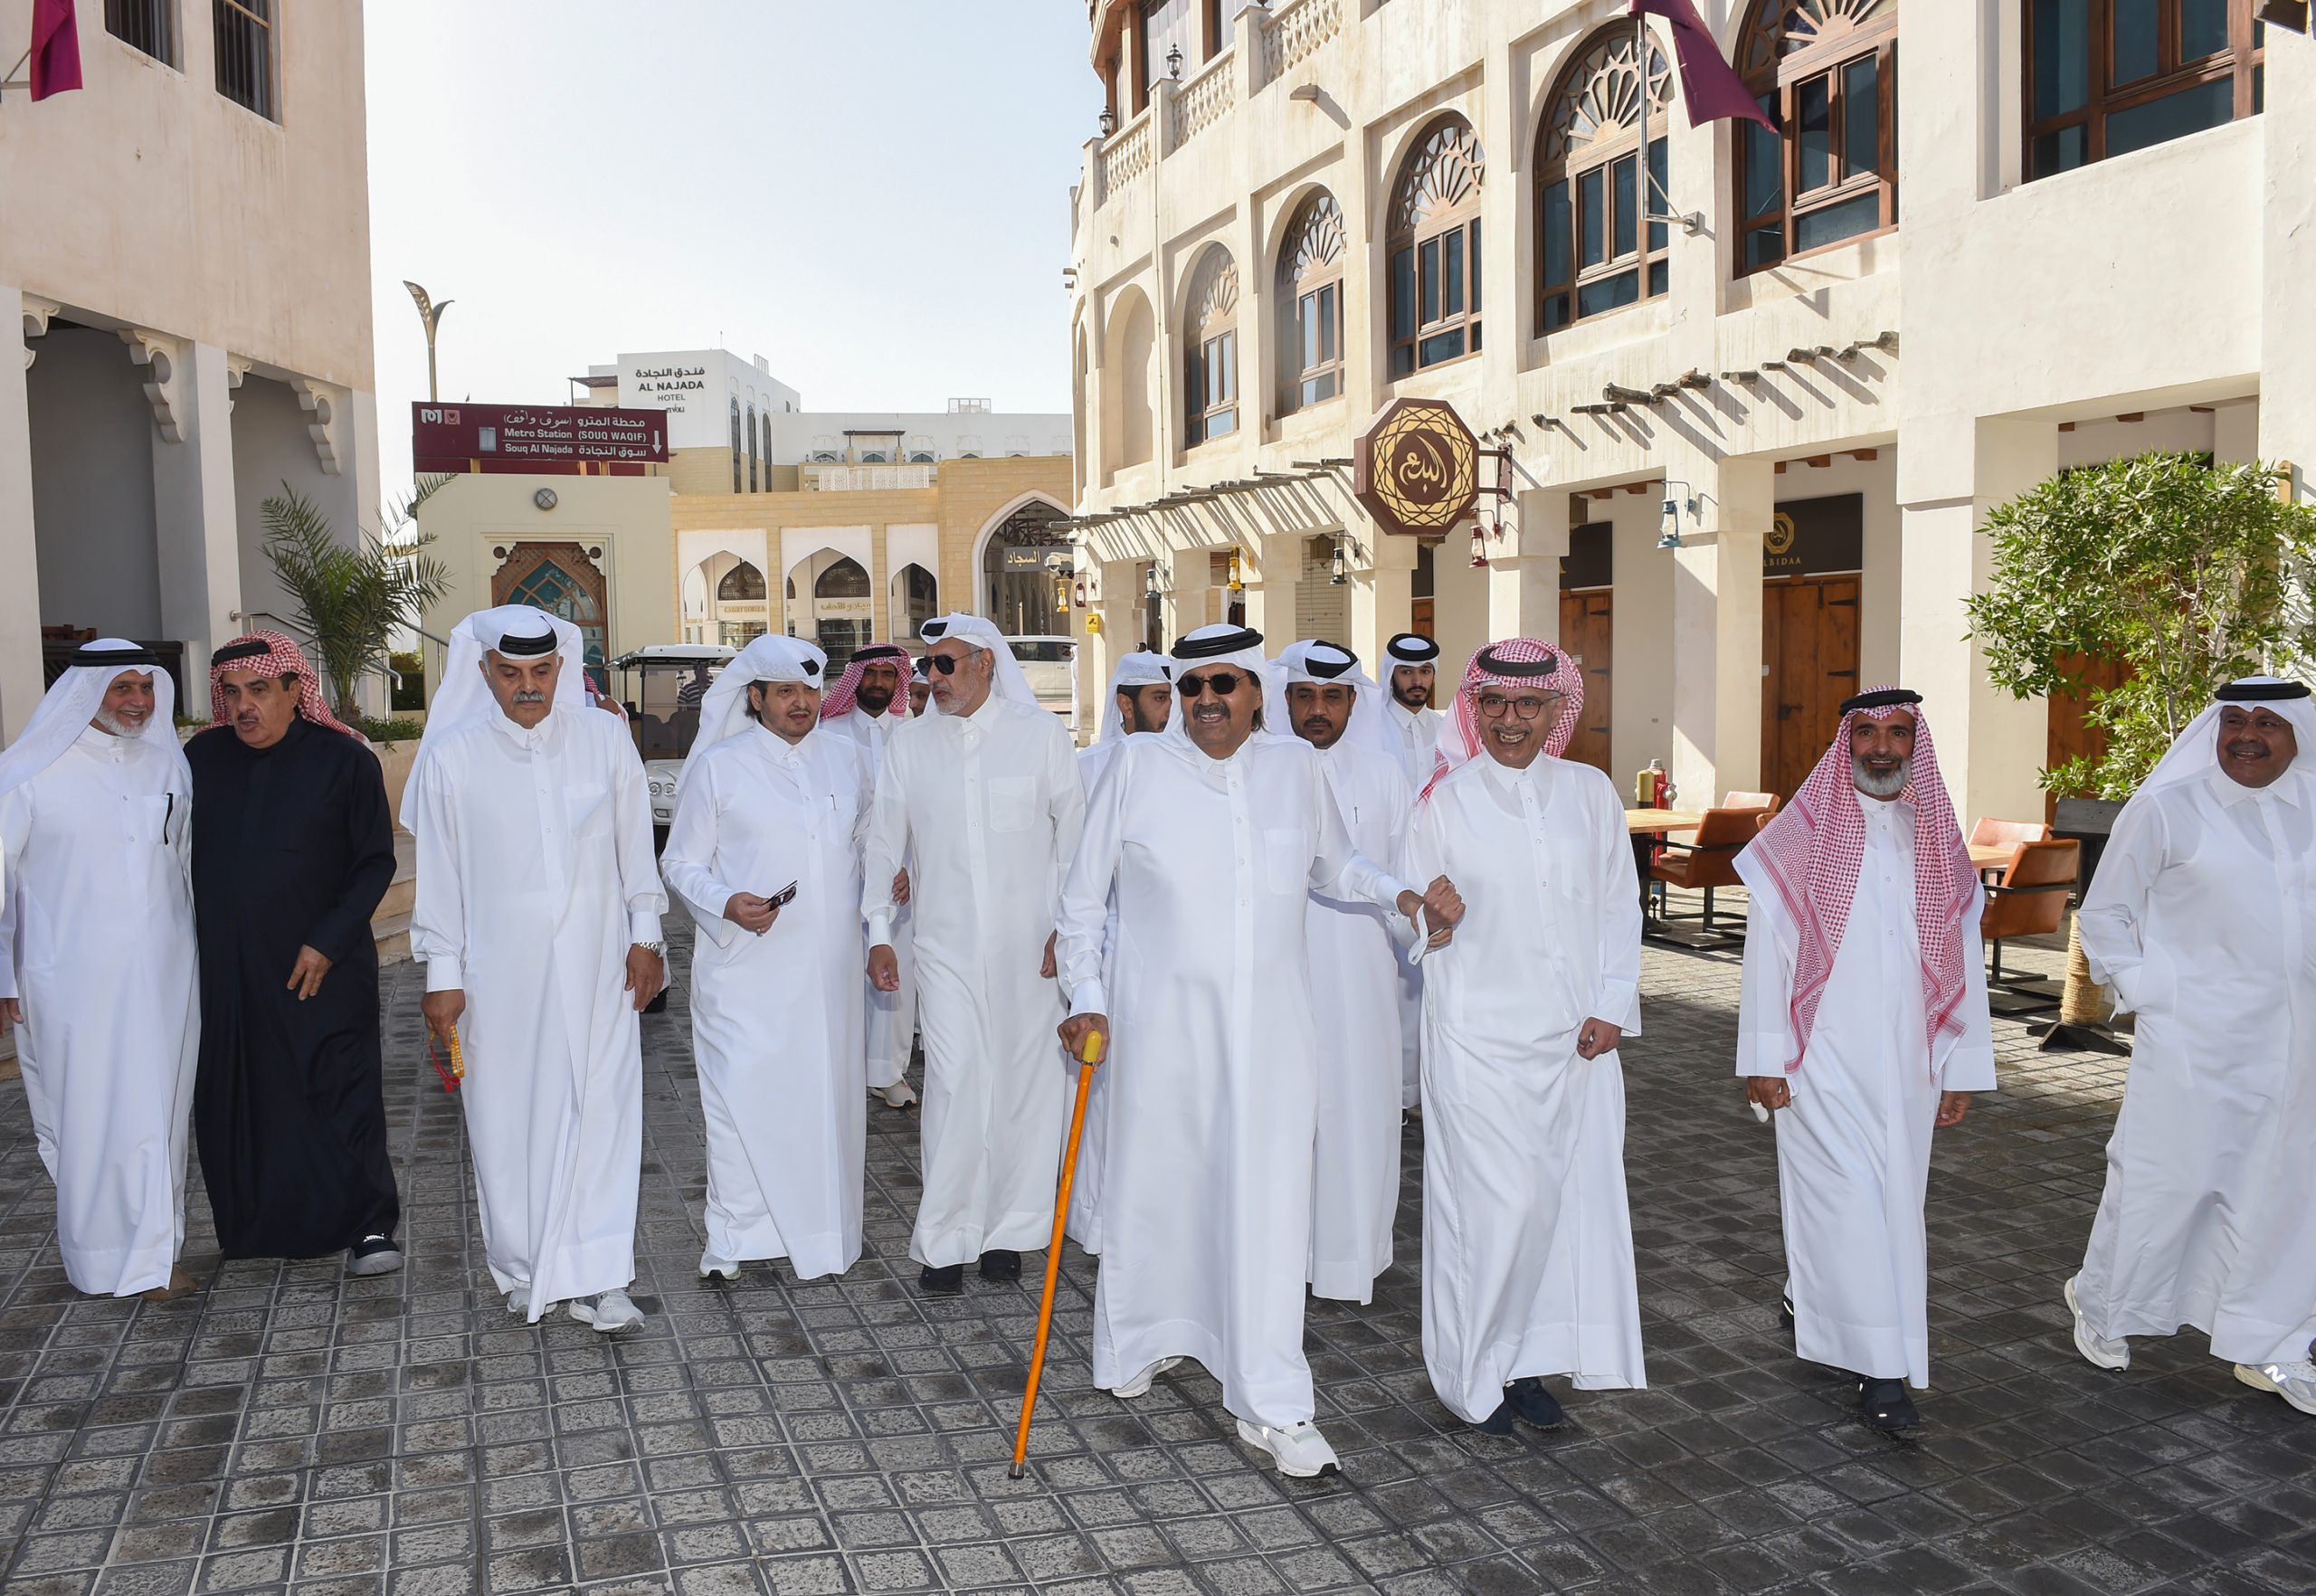 HH the Father Amir Participates in National Sports Day